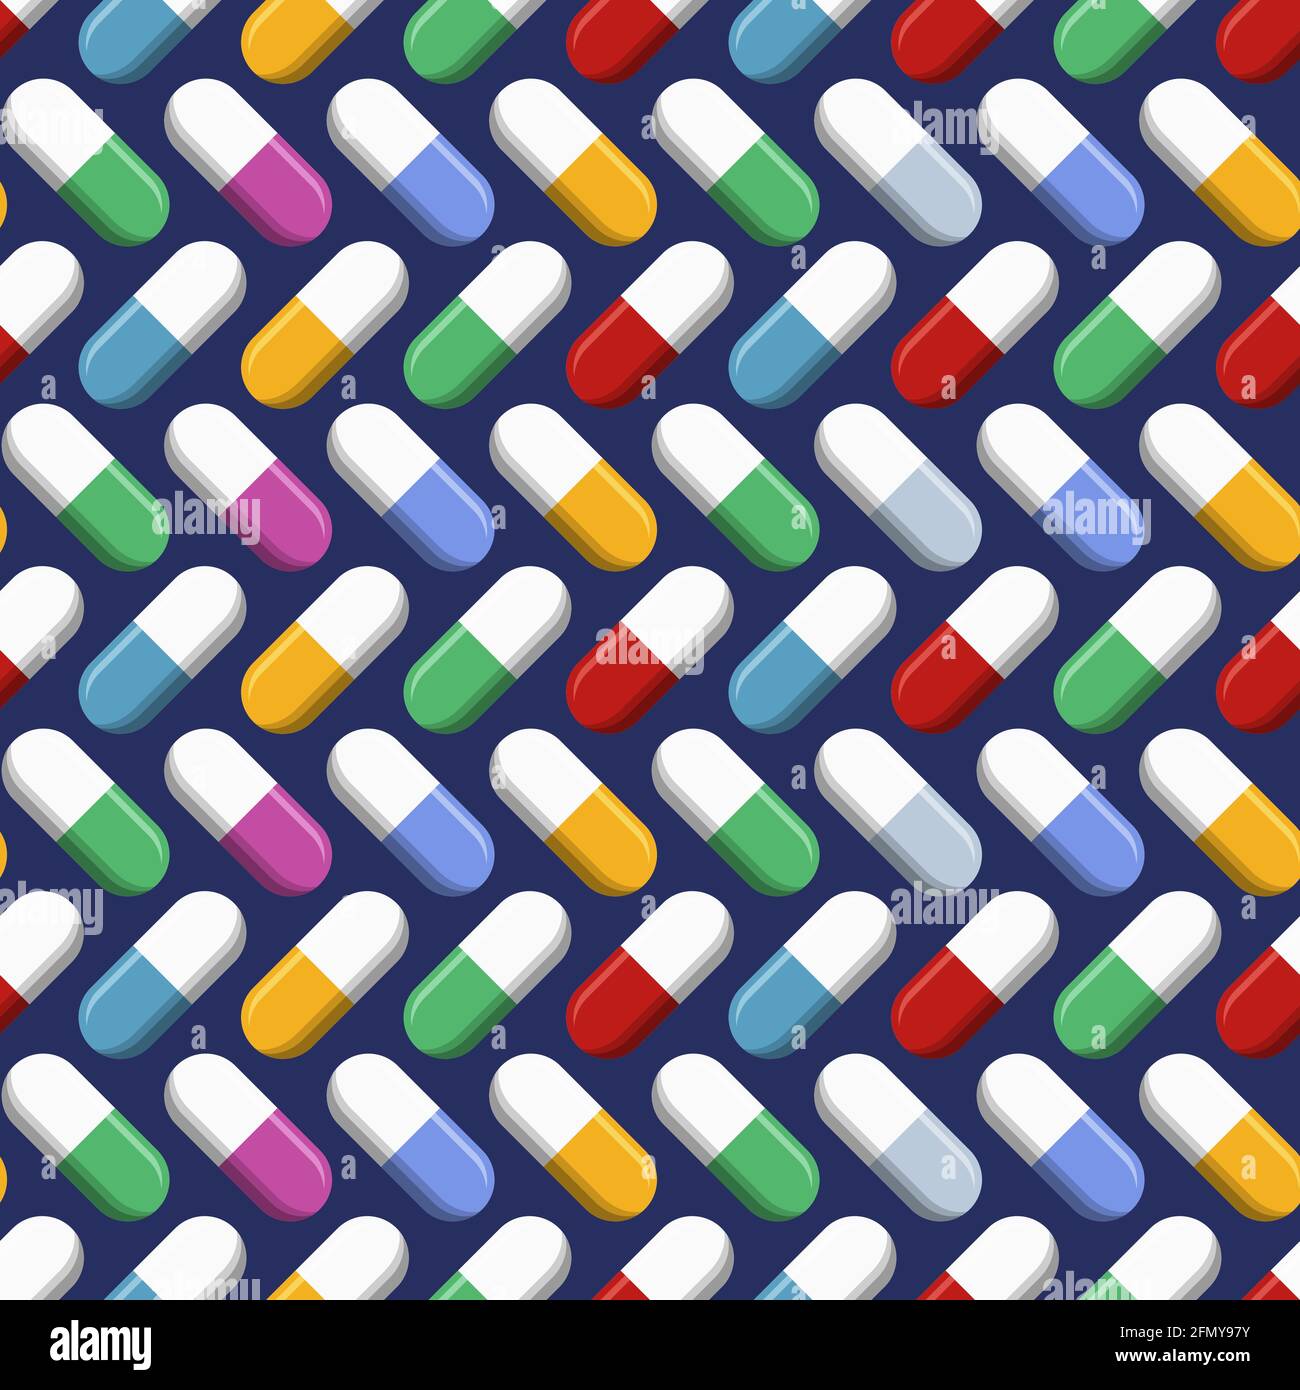 Vector seamless pattern with pills, tablets of different colors, isolated on dark blue background. Medical preparations. Flat design. Stock Vector